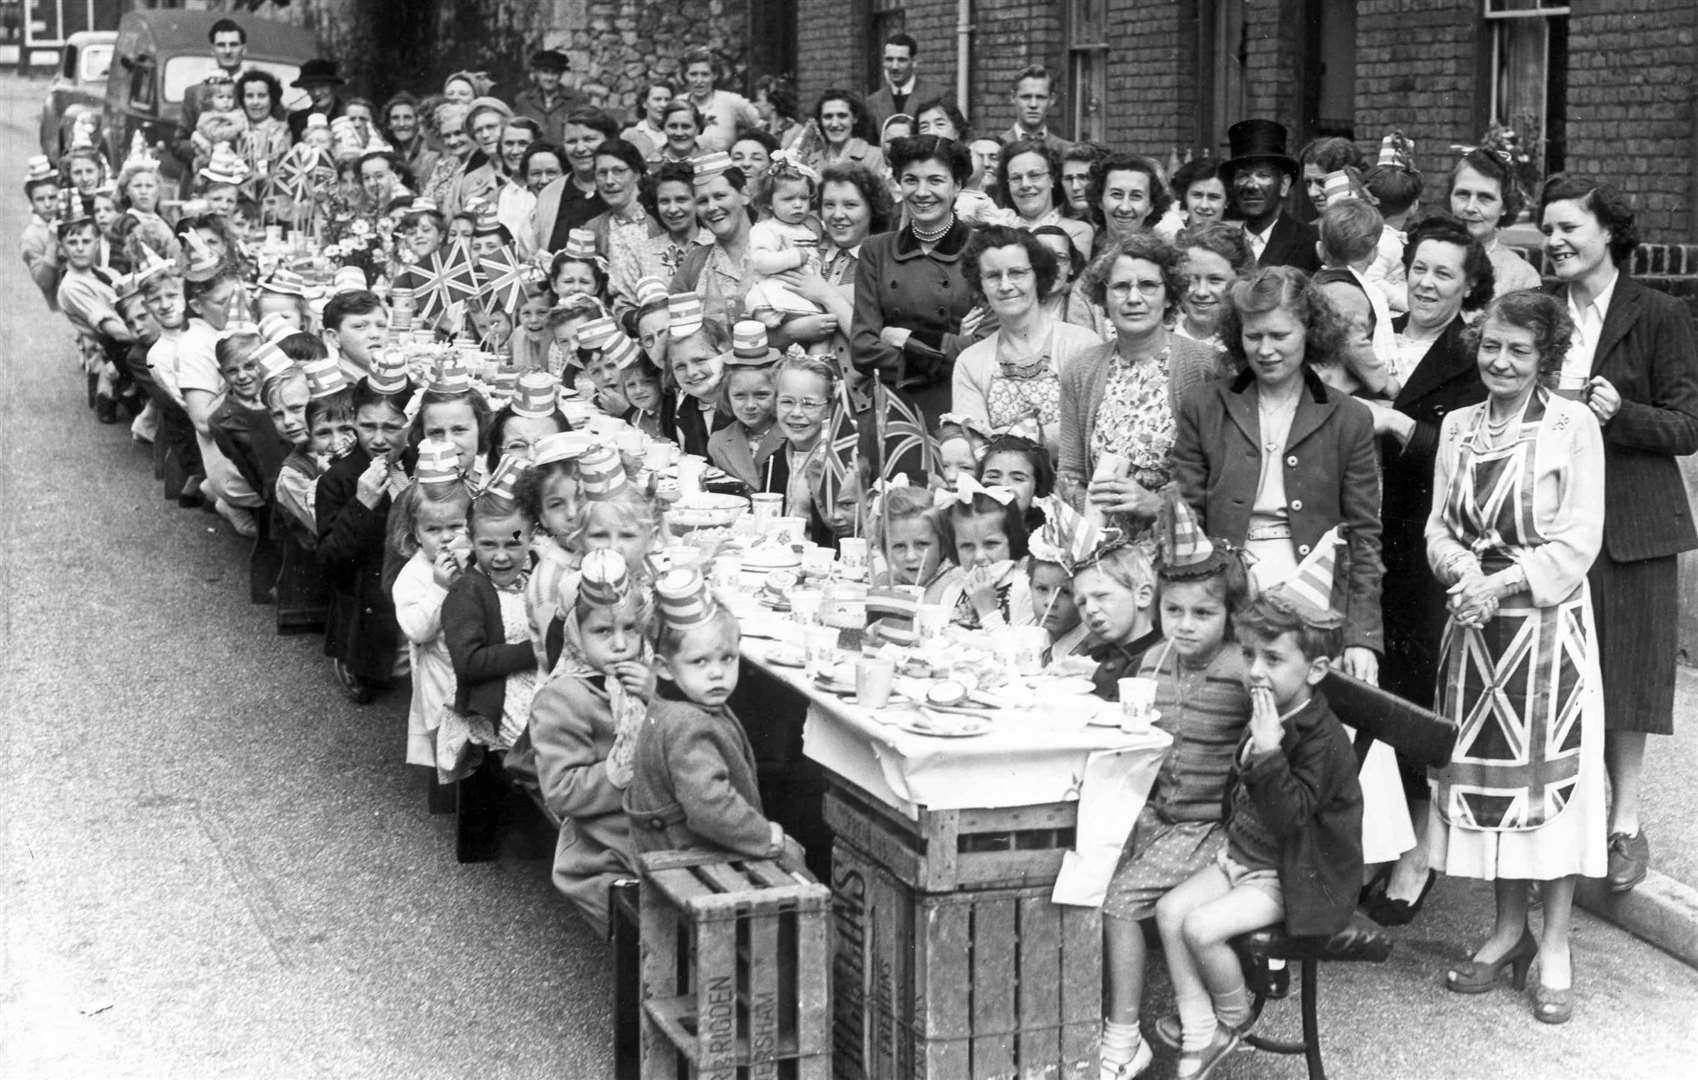 Wooden pallets and boxes were used in Perryfield Street, Maidstone to make a table for children